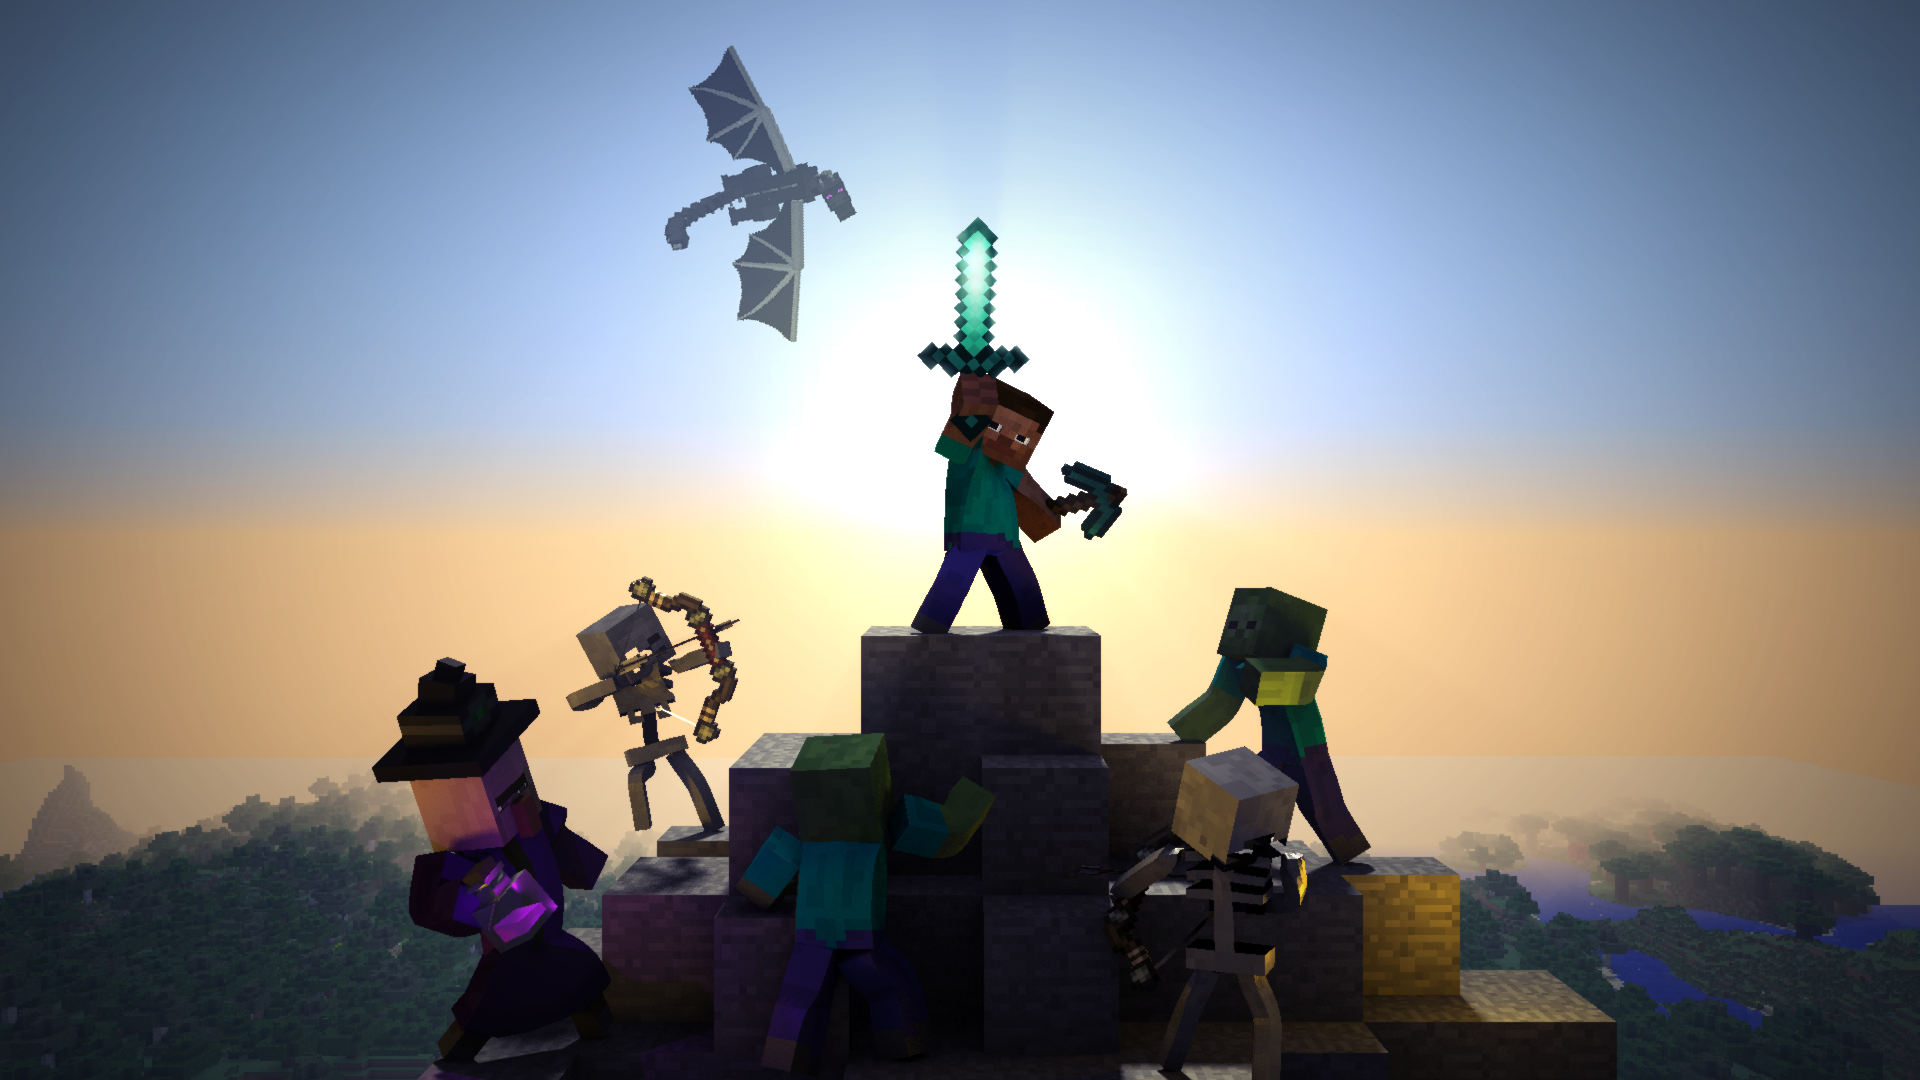 This Is A HD 3d Minecraft Wallpaper That I Worked On Used Blender